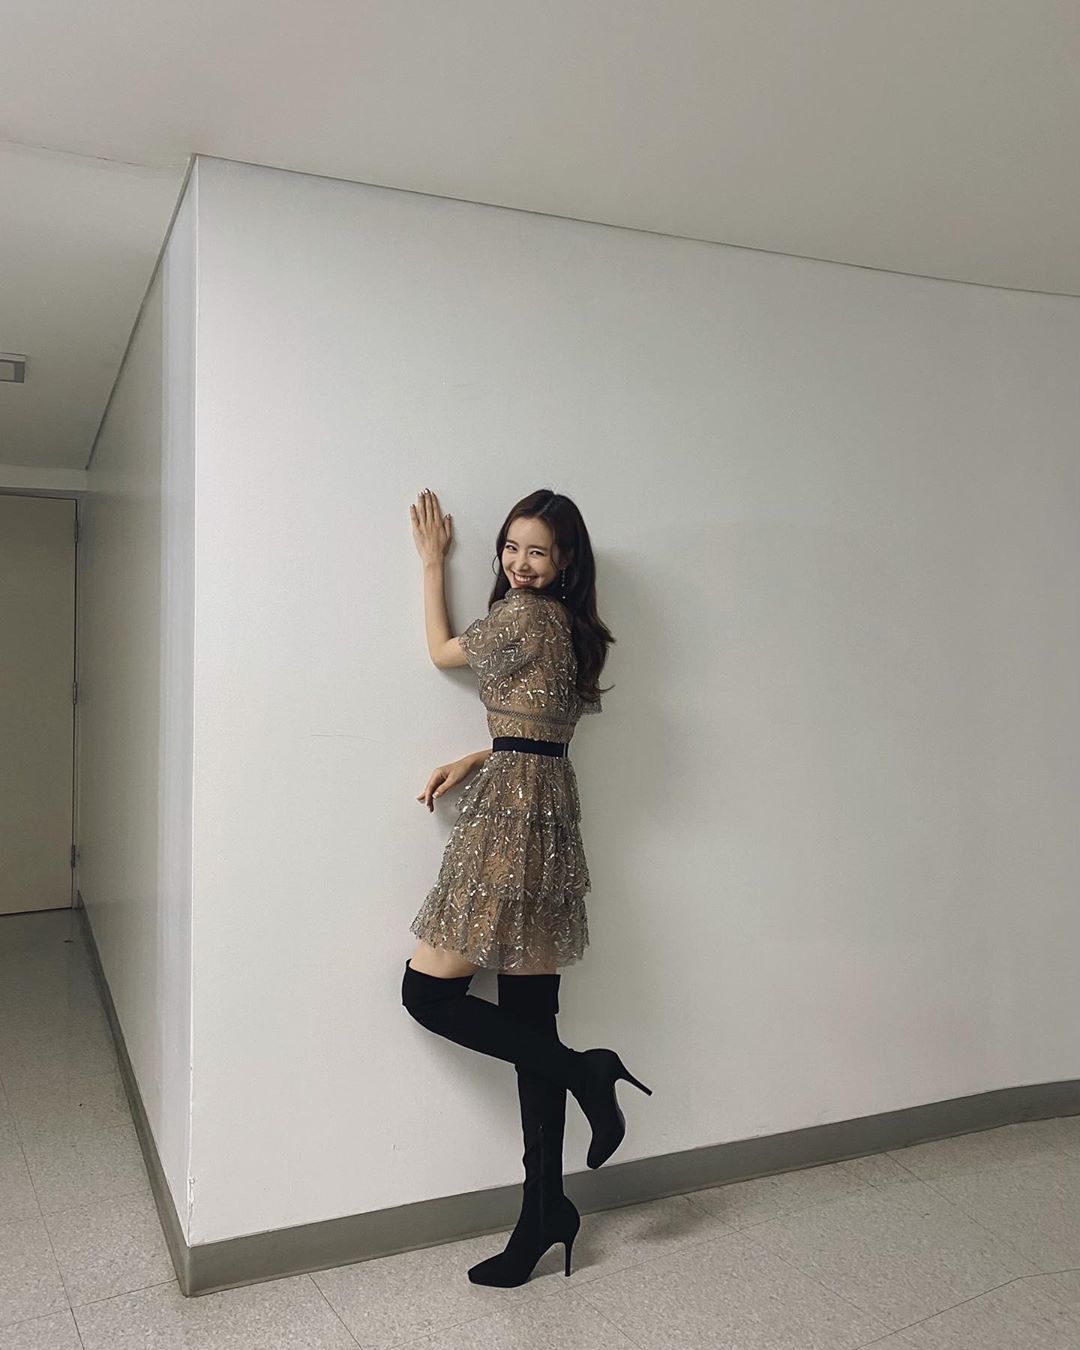 Actor Jin Se-yeon has reported on his recent situation.On the 14th, Jin Se-yeon wrote on his Instagram: 2020 Soribada Best K Music Awards was so enjoyable.I am catching a pose with excitement. The photo released shows Jin Se-yeon posing in front of the wall, who is seen smiling brightly.The netizens responded that they were too pretty and Thank you very much yesterday.Jin Se-yeon participated in the 2020 Soribada Awards on the 13th as a prize winner.Photo: Jin Se-yeon Instagram